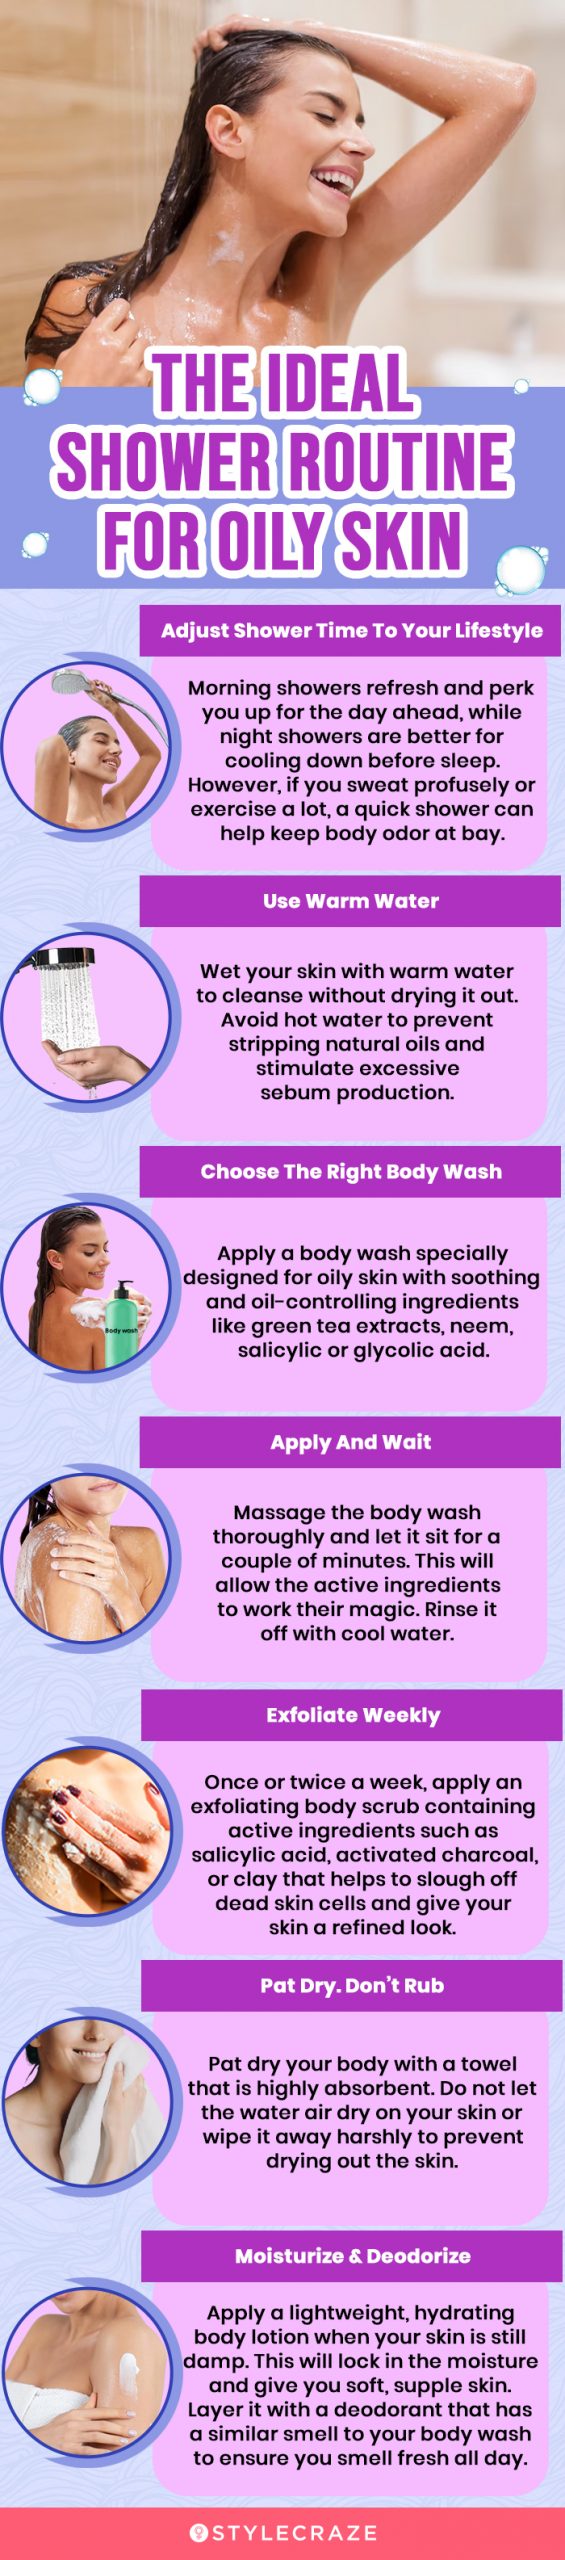 The Ideal Shower Routine For Oily Skin (infographic)